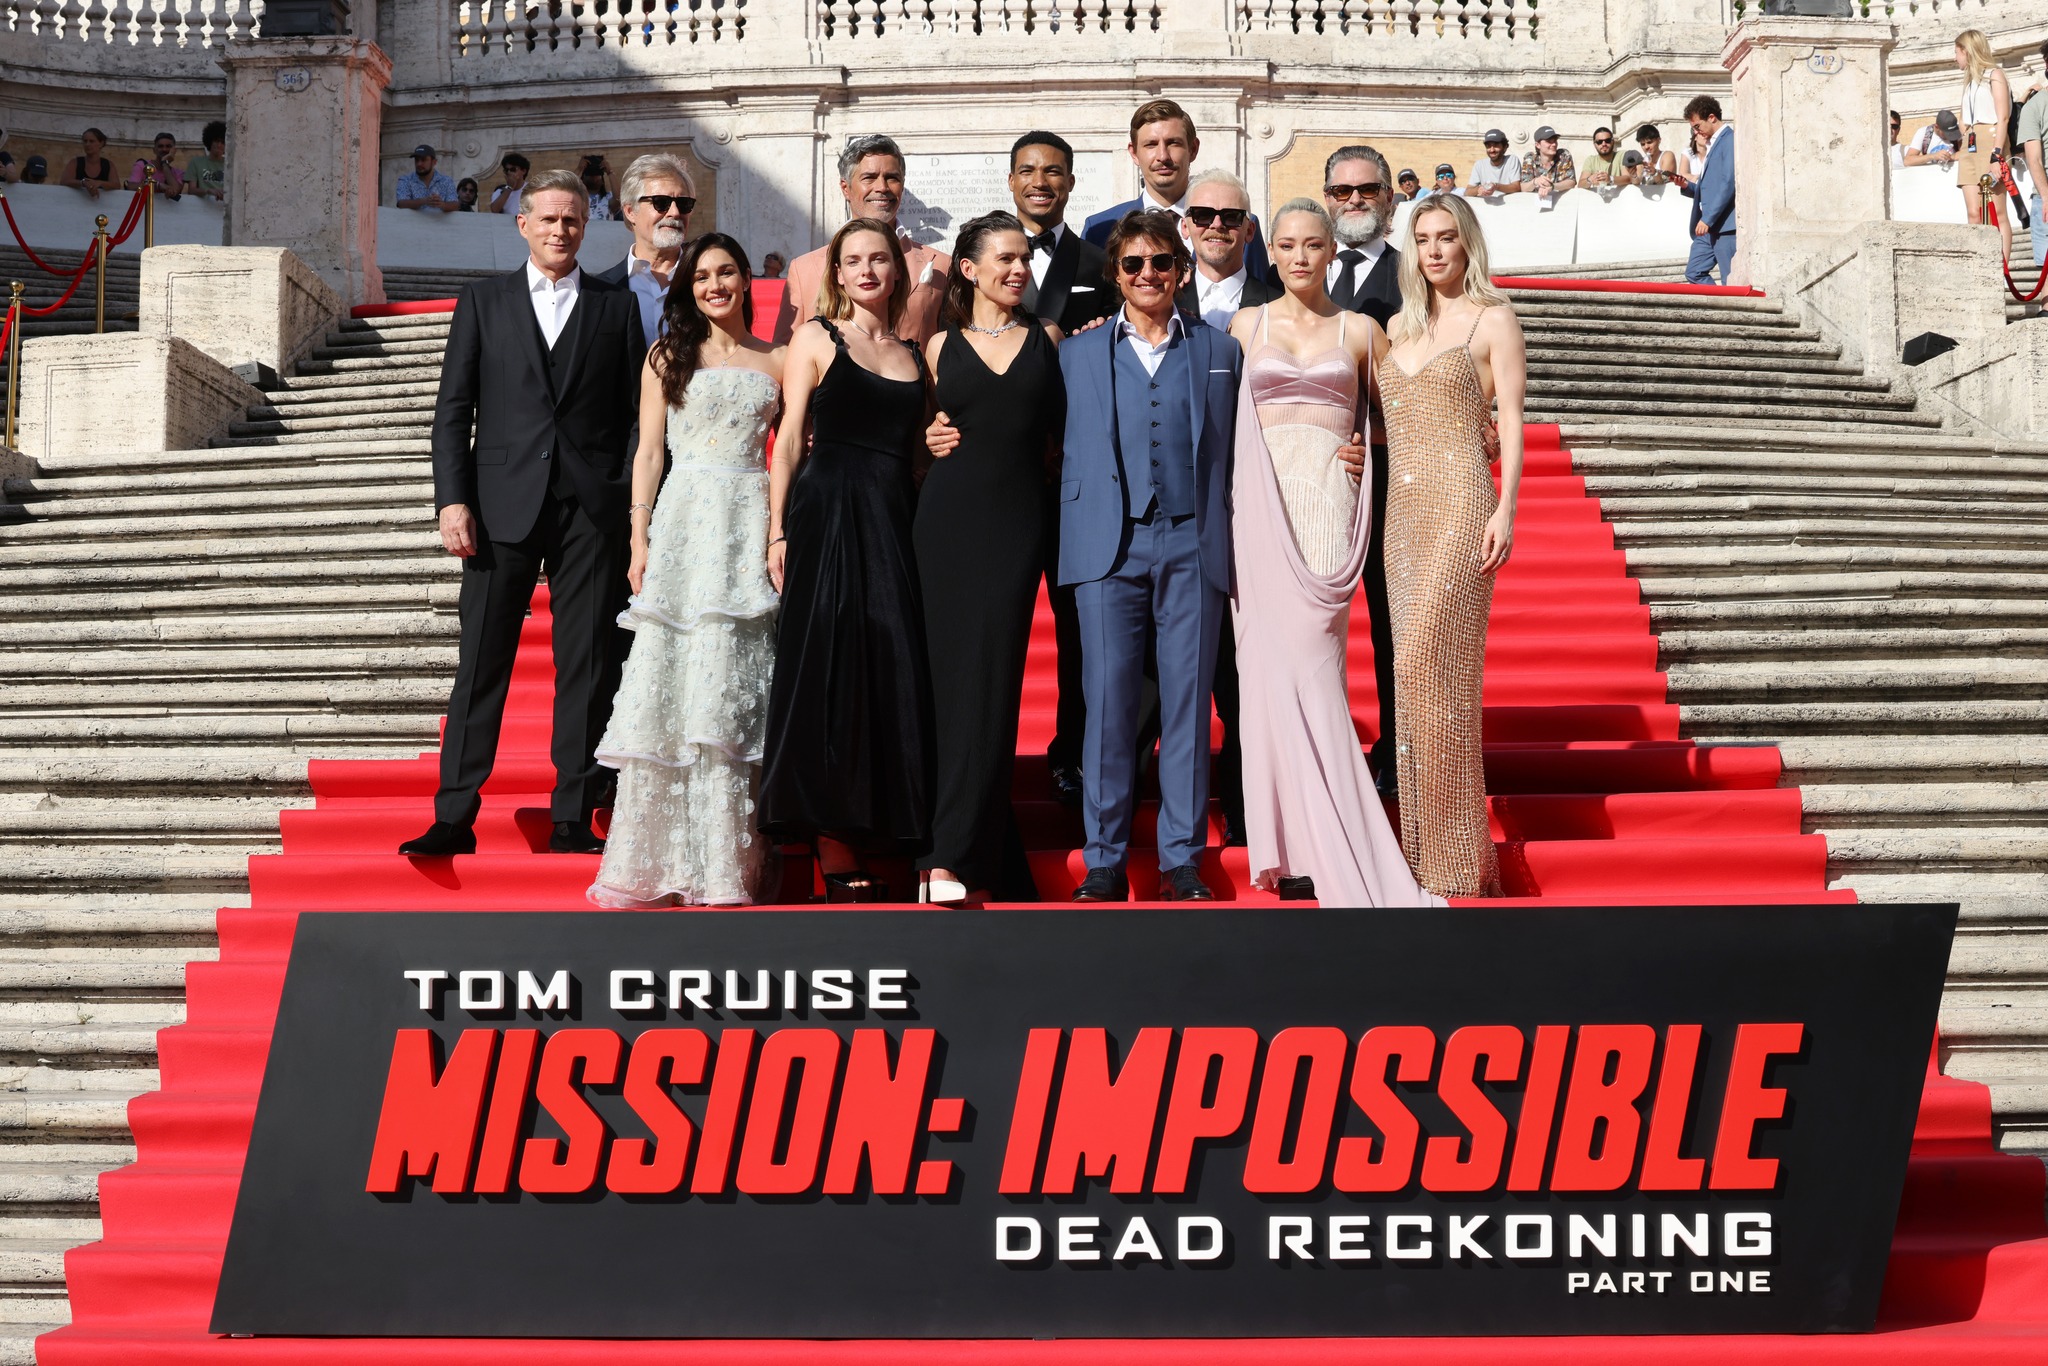 ROME, ITALY - JUNE 19: Cast members attend the Red Carpet at the Global Premiere of "Mission: Impossible - Dead Reckoning Part One" presented by Paramount Pictures and Skydance at The Spanish Steps on June 19, 2023 in Rome, Italy. (Photo by Stefania M. D'Alessandro/Getty Images for Paramount Pictures)